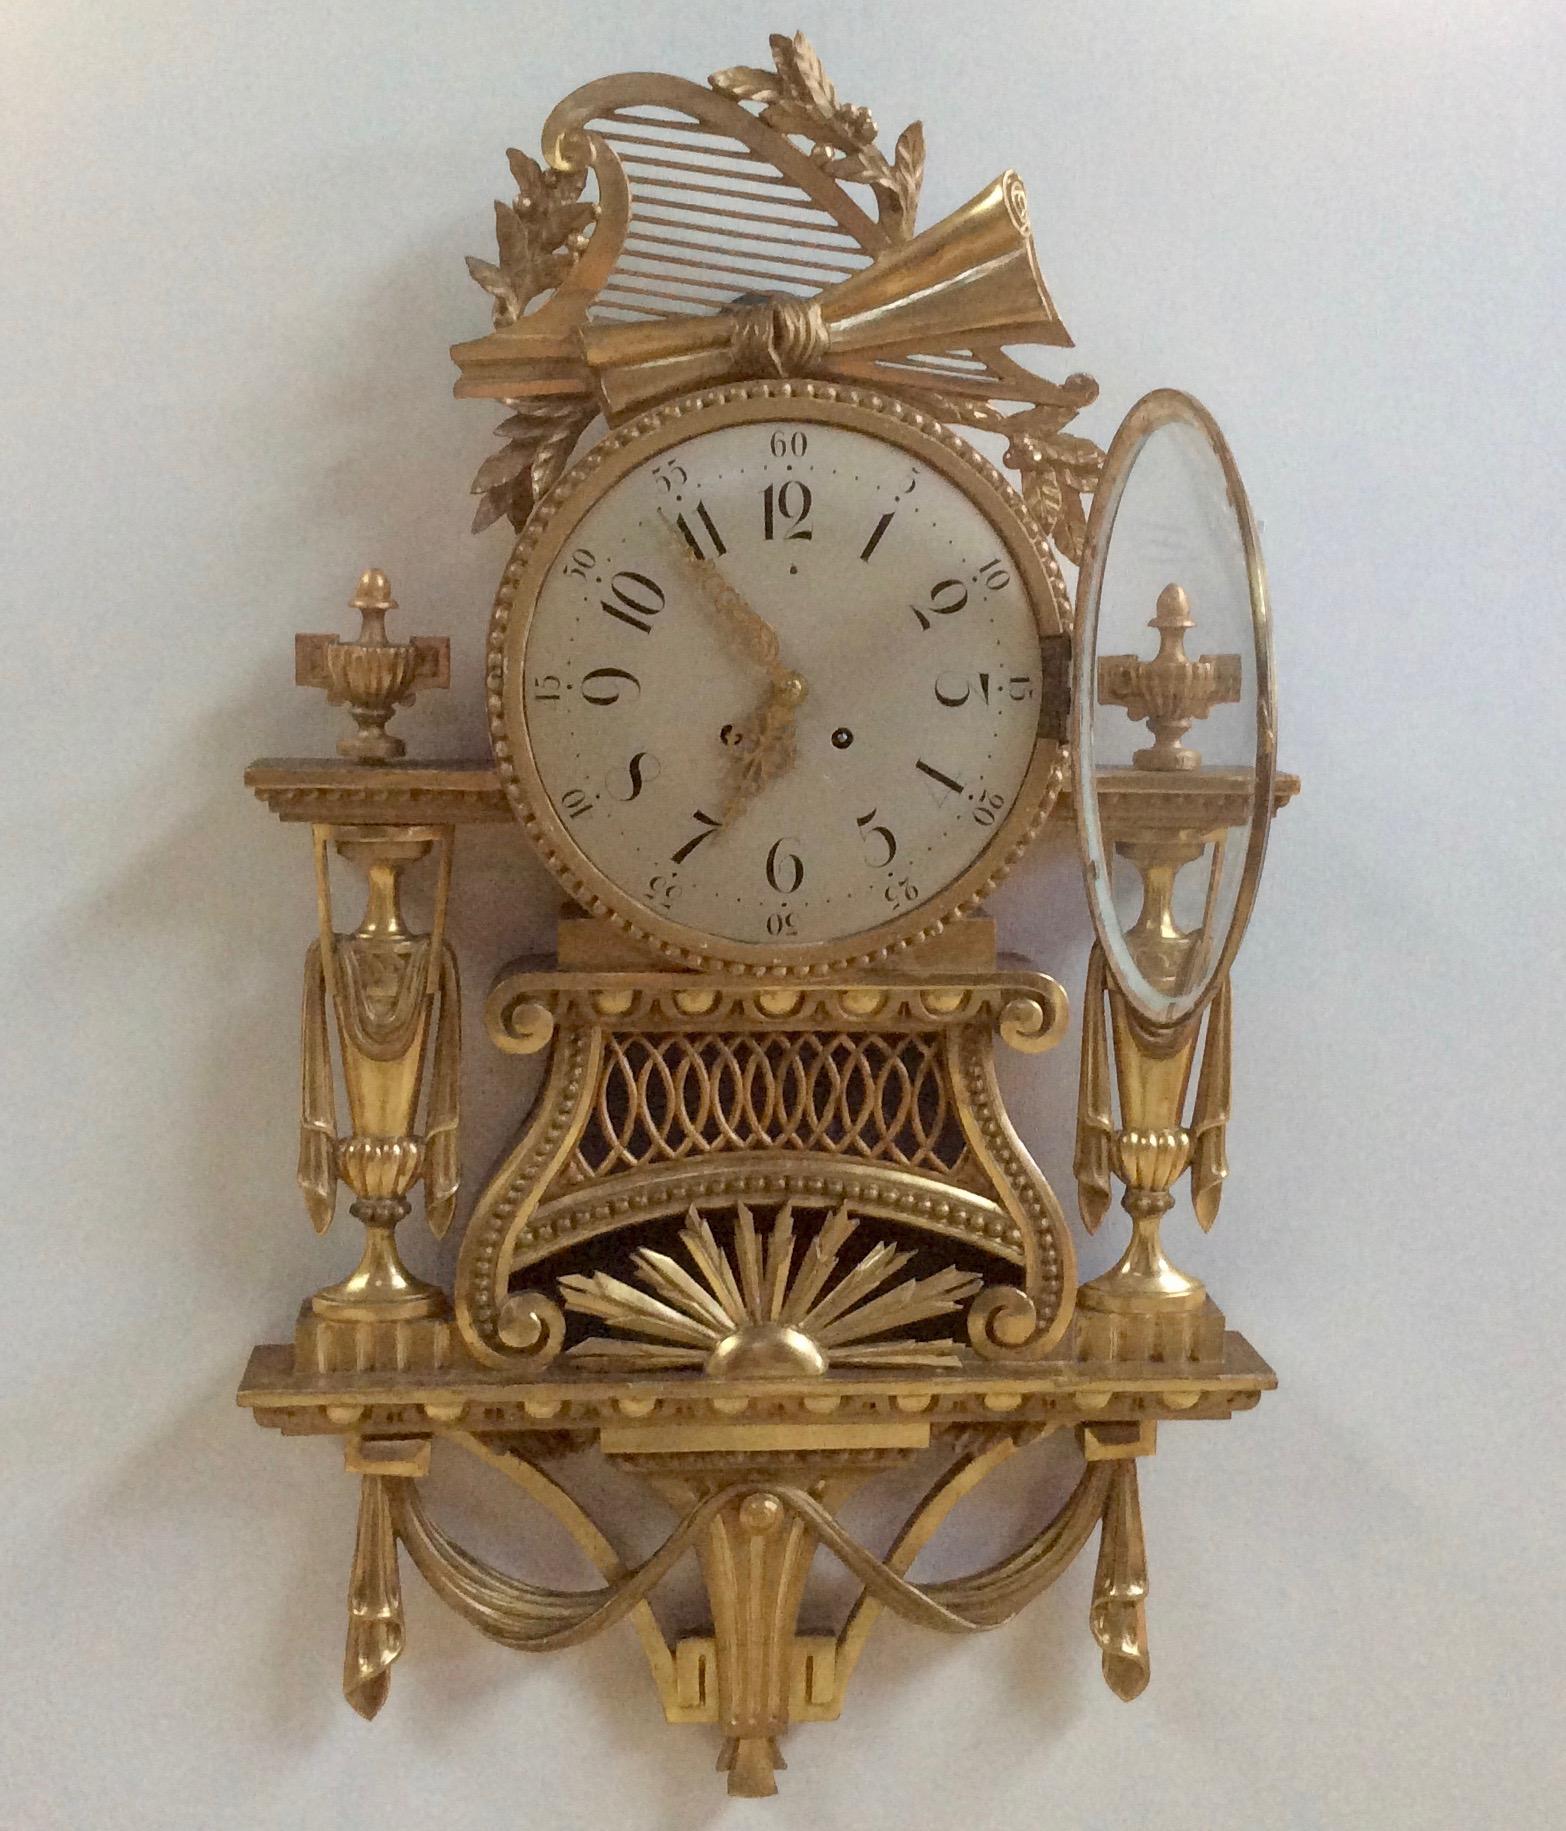 Gilt cartel clock


Painted dial with Roman numerals and pierced gilt hands. 

 Giltwood case with swag decoration, turned finials, surmounted by a harp with starburst decoration below the dial.

Eight day movement by Gustav Becker with silk